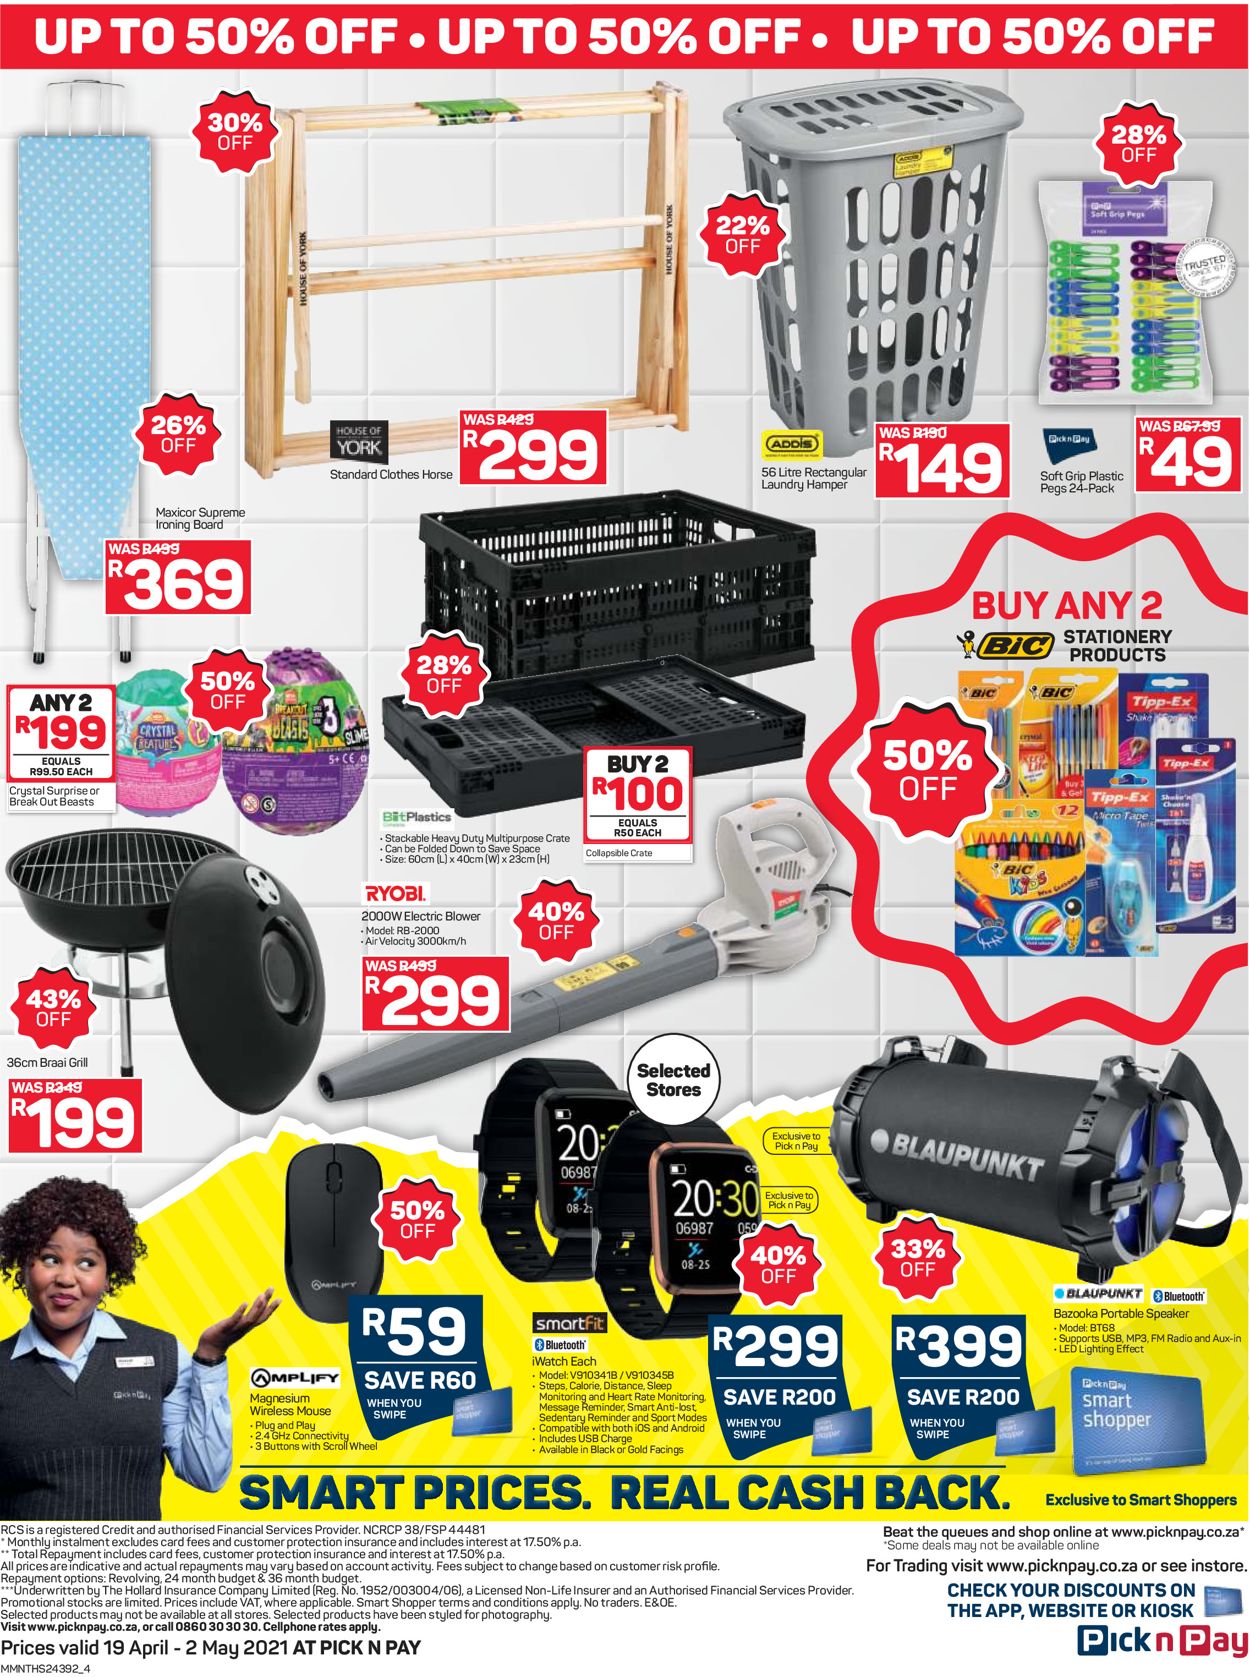 Pick n Pay Catalogue - 2021/04/19-2021/05/02 (Page 4)